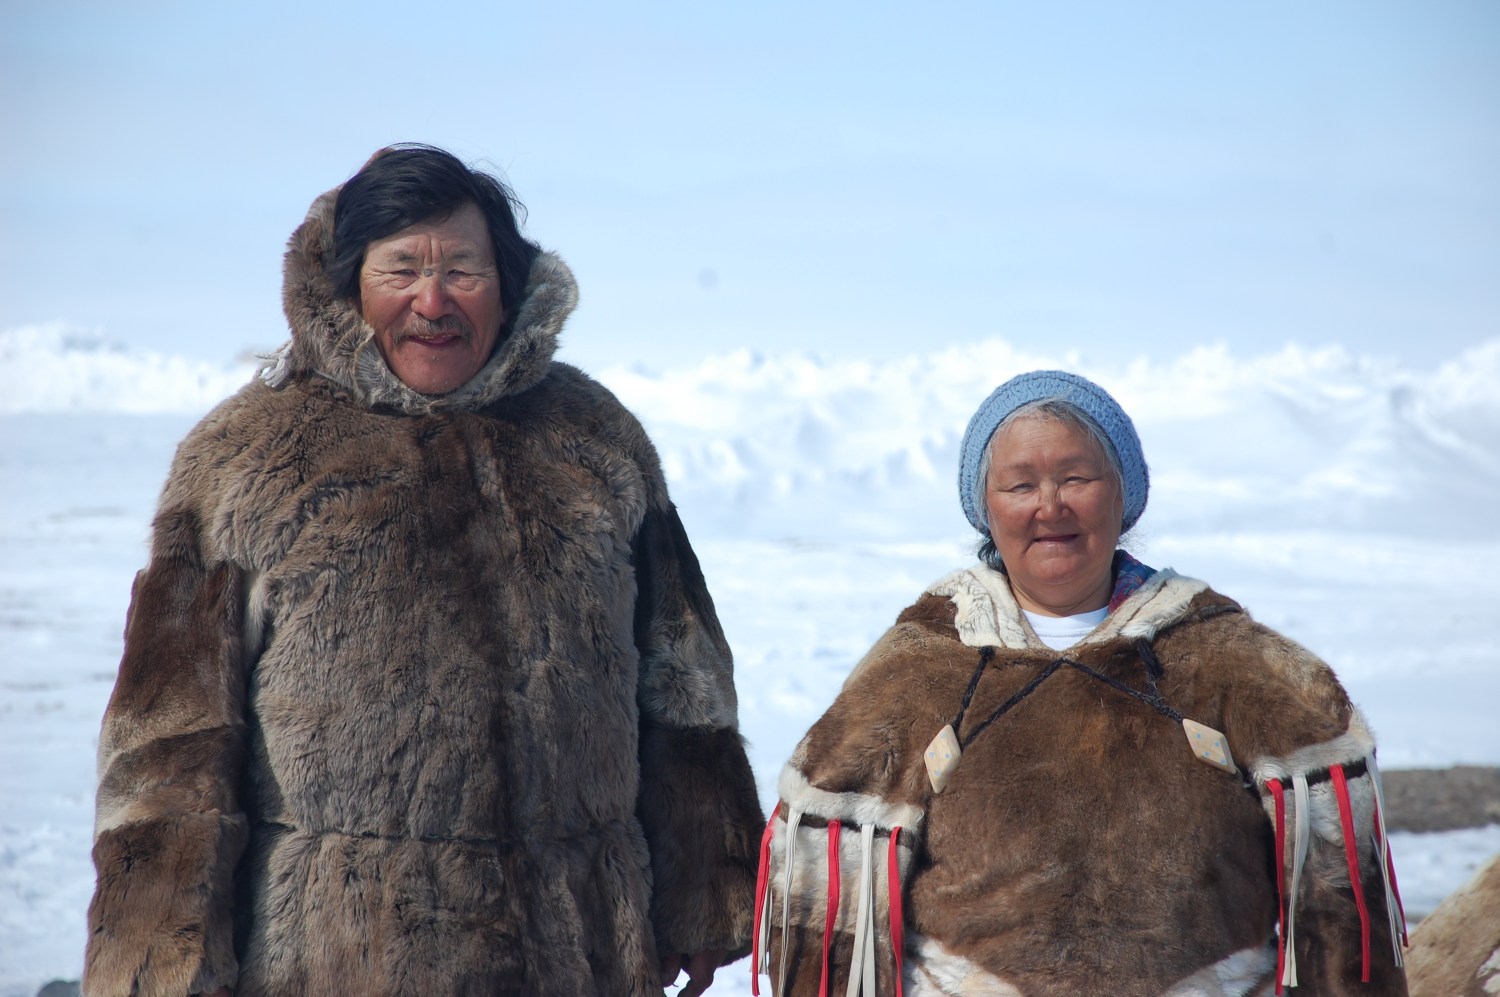 Two Inuit in traditional clothing